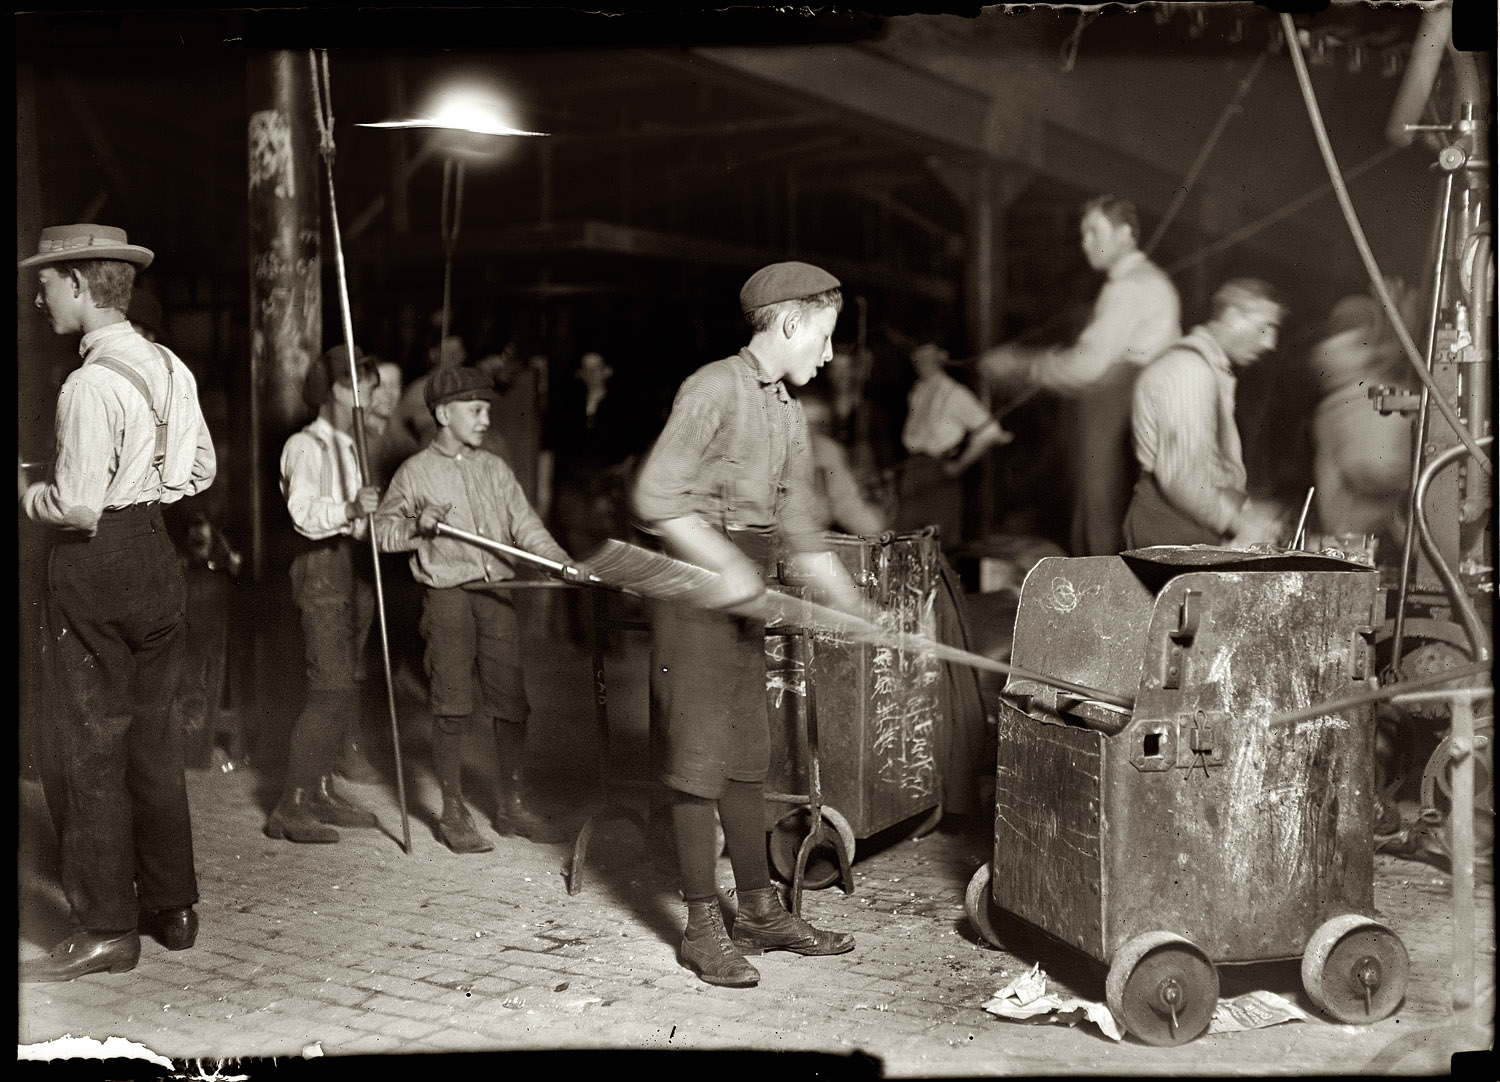 October 1908. "Central Glass Company. Wheeling, West Virginia. Dozens of small boys here." Photograph and caption by Lewis Wickes Hine. View full size.